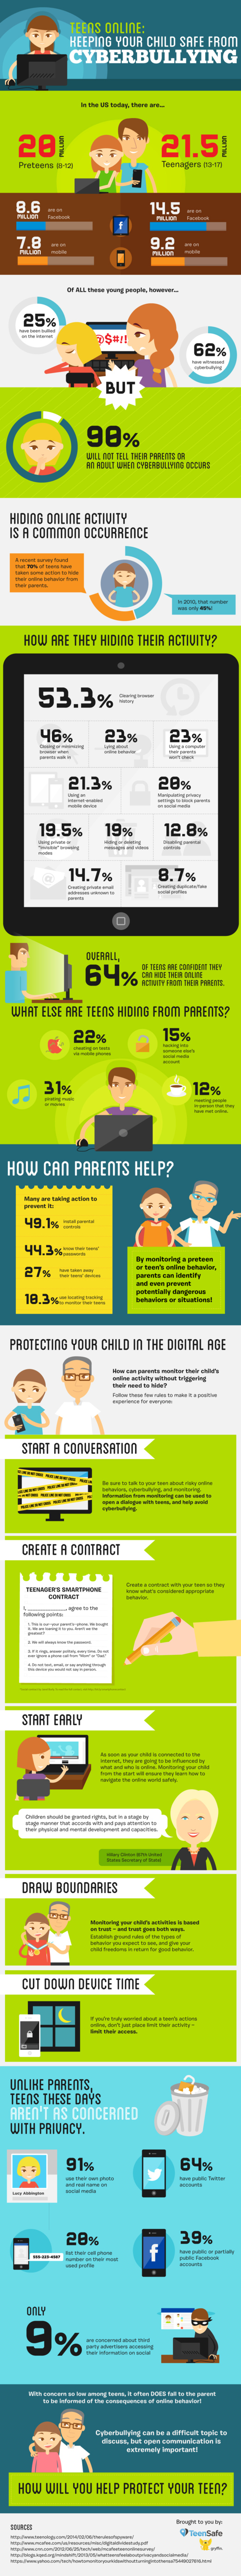 Keeping Children Safe from Cyberbullying